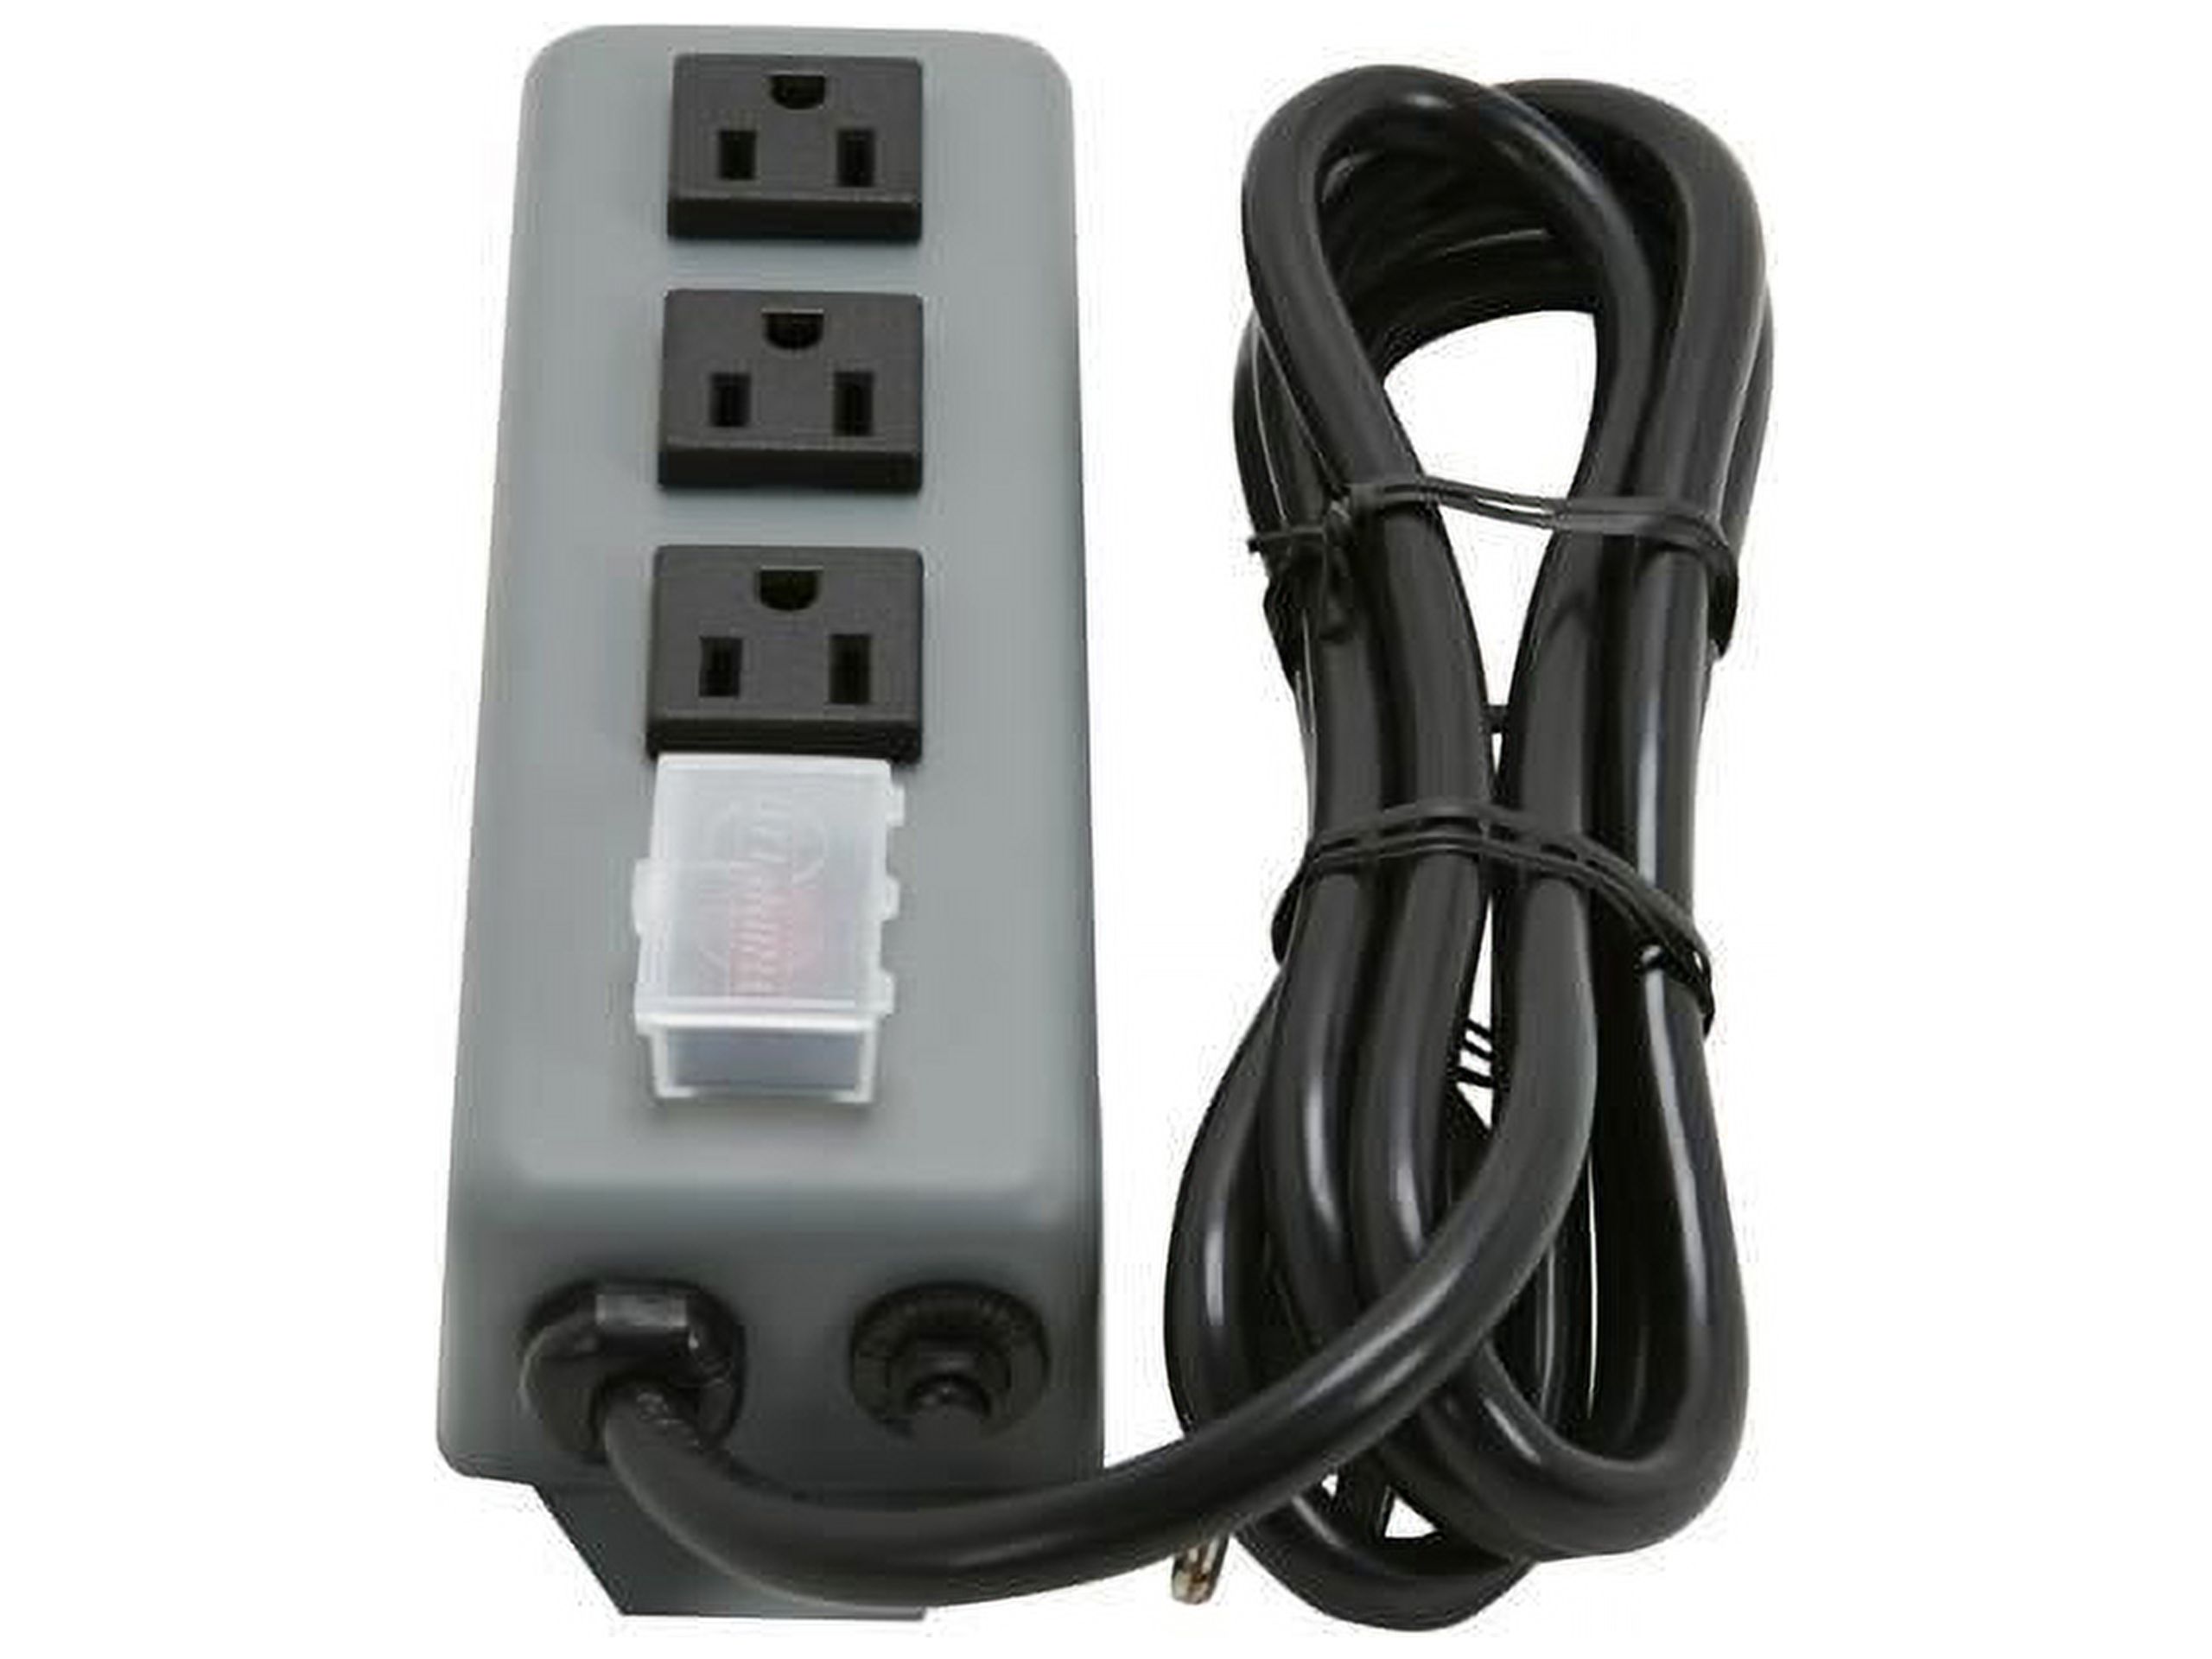 Tripp Lite 3SP Waber by Tripp Lite 3-Outlet Industrial Power Strip, 6-Foot Cord - image 2 of 4